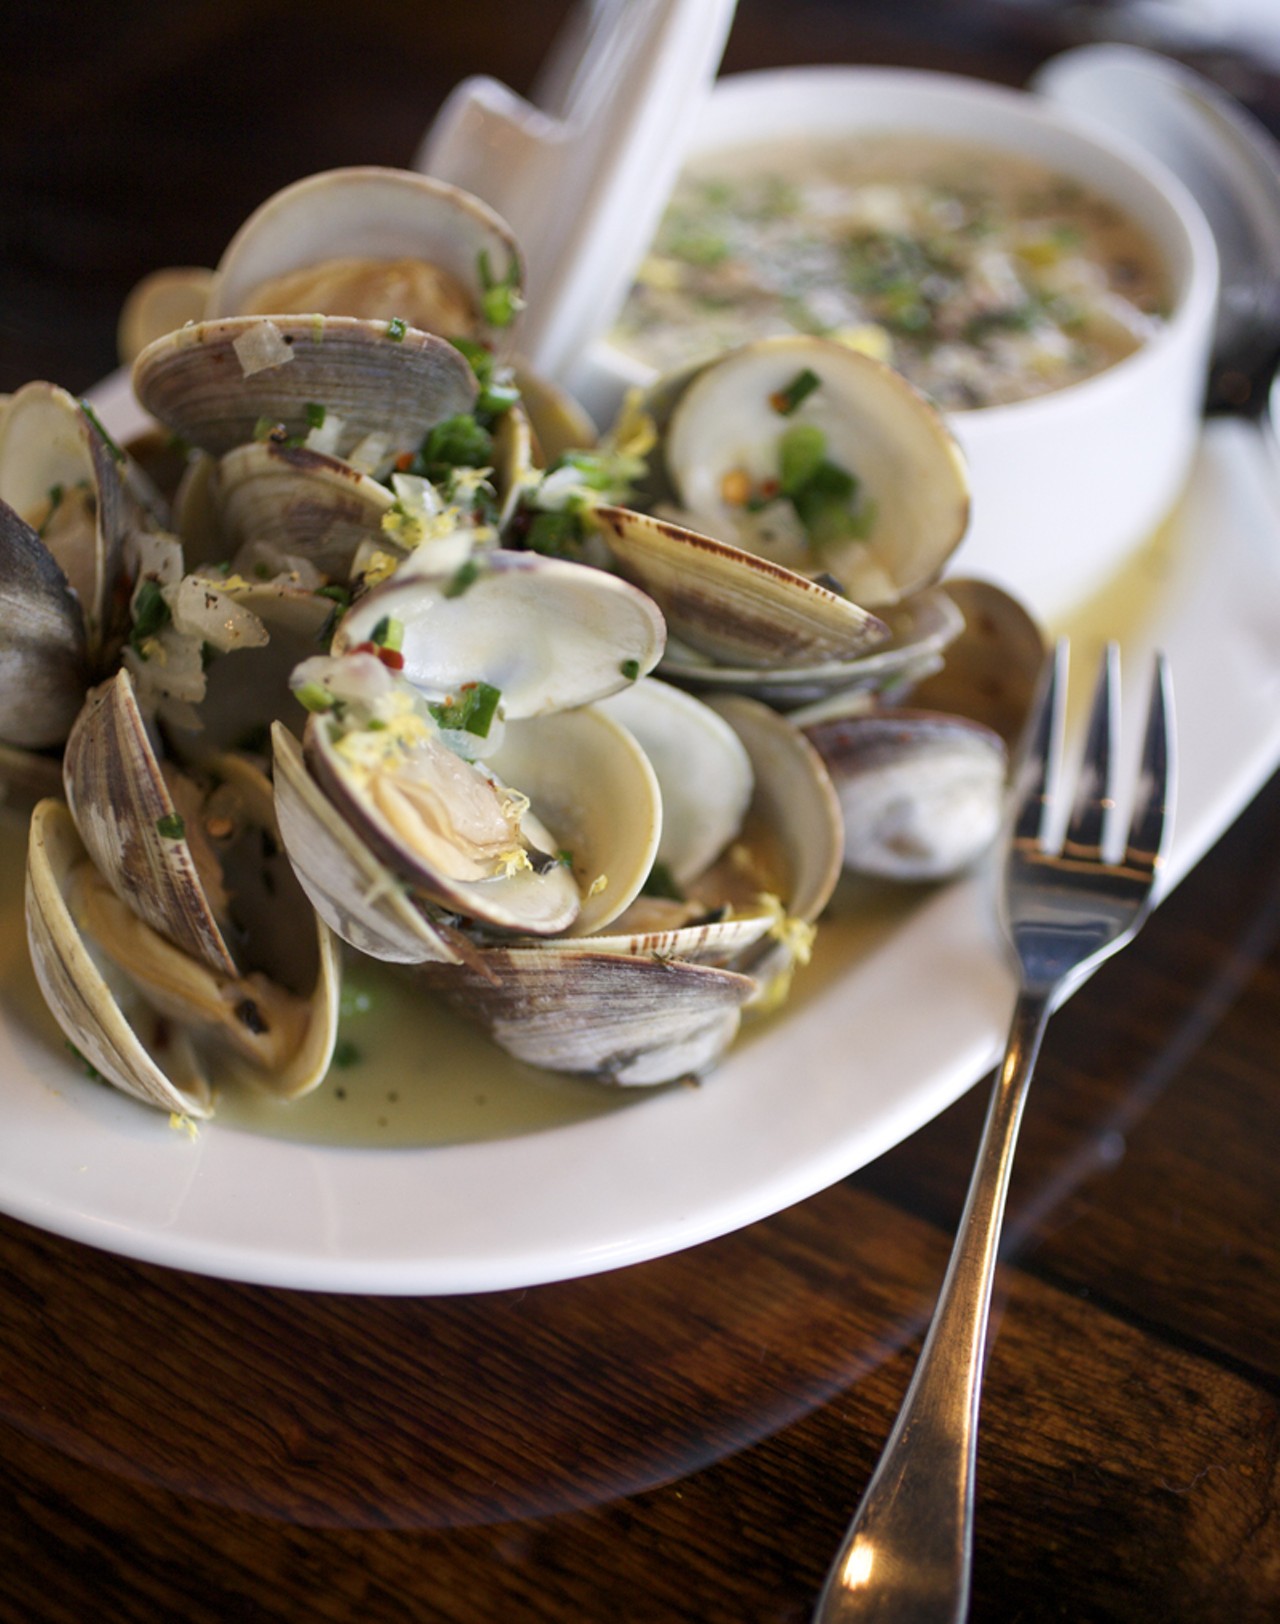 New England Clam Chowder is served along side white wine steamed clams.